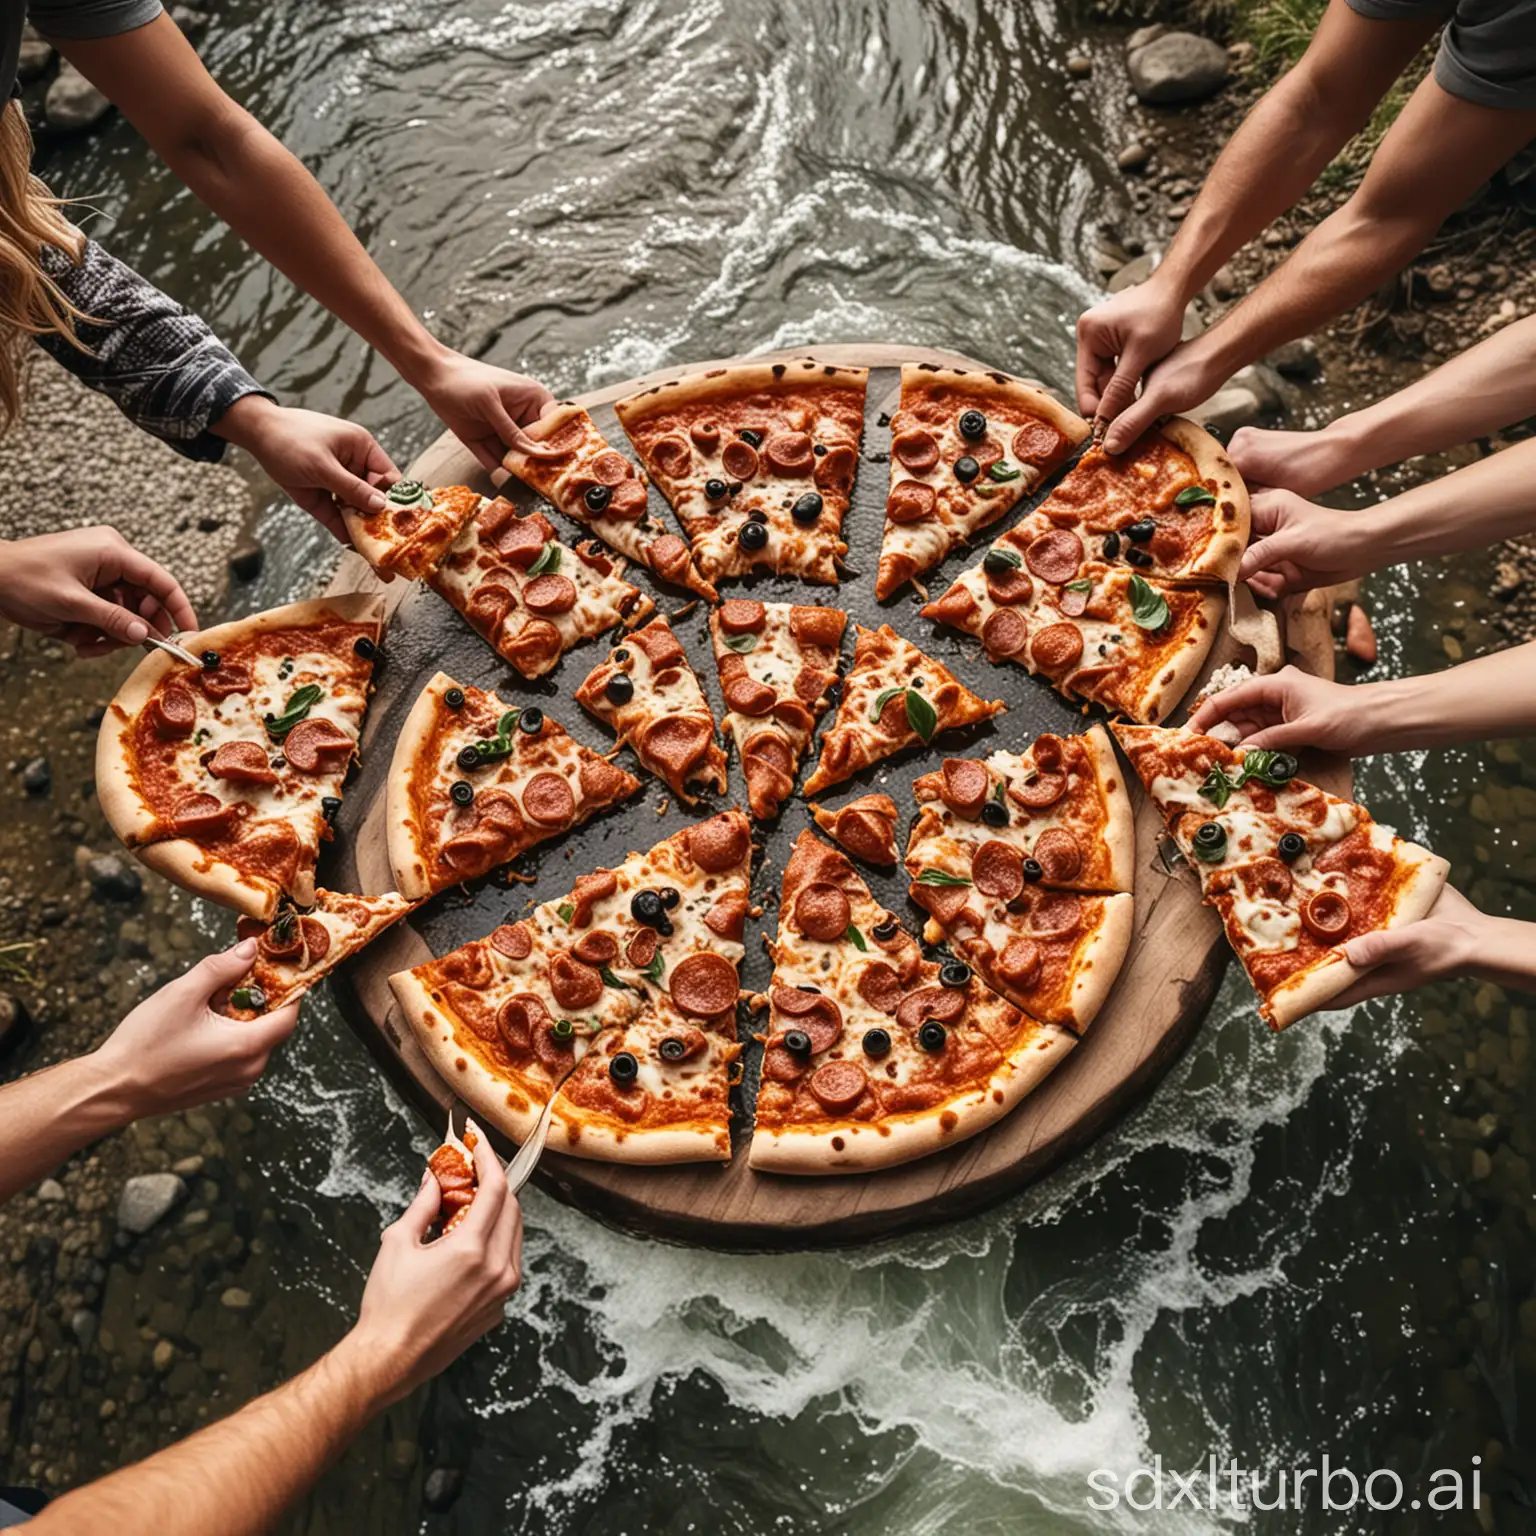 a ultra HD photo from a group of people eating pizza at a river